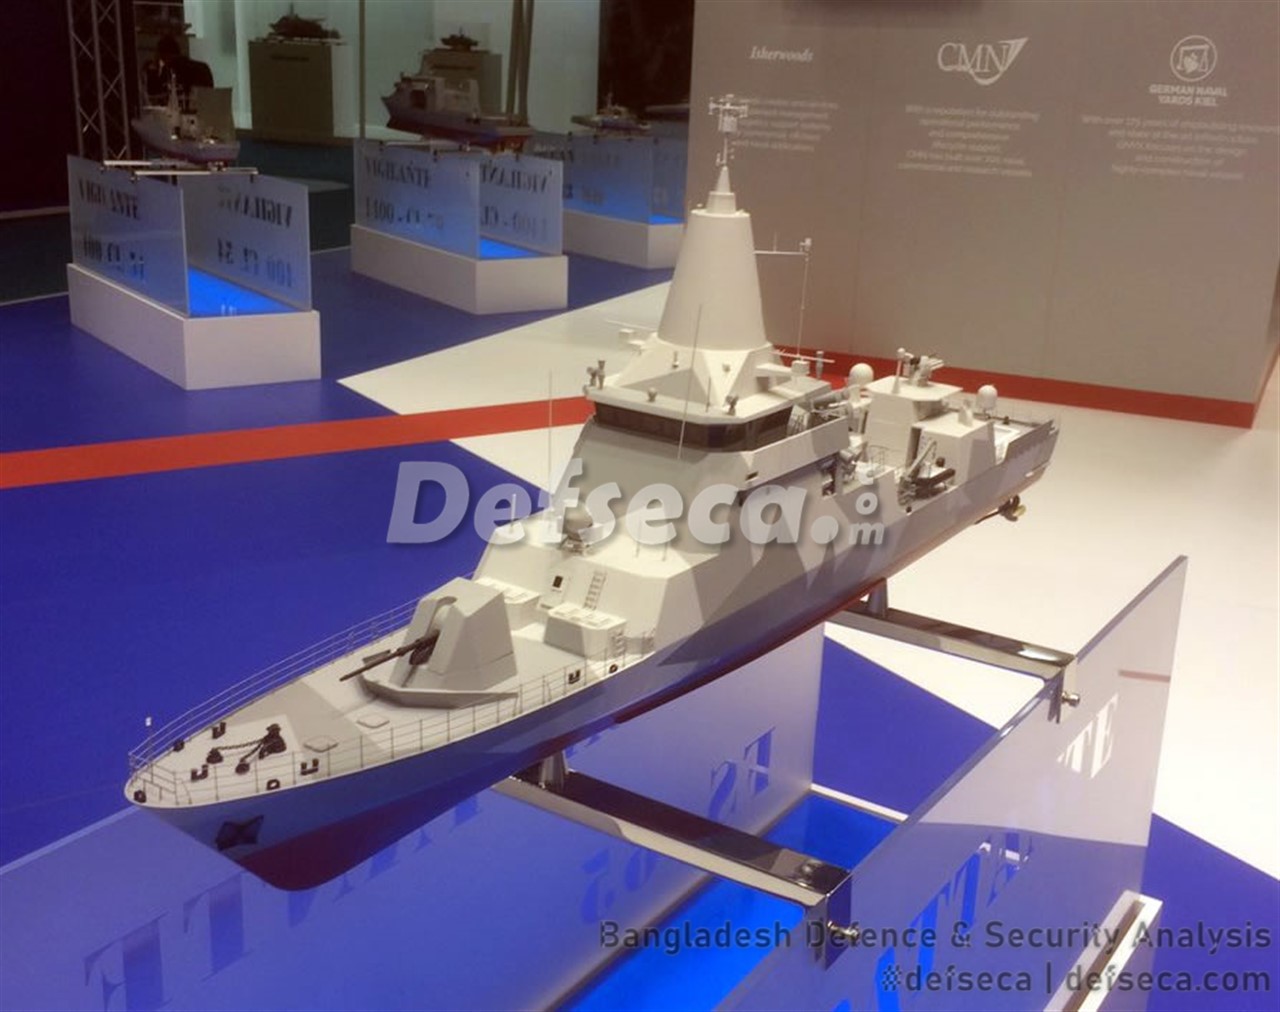 DEW wins contract for Bangladesh Navy’s next generation LPC